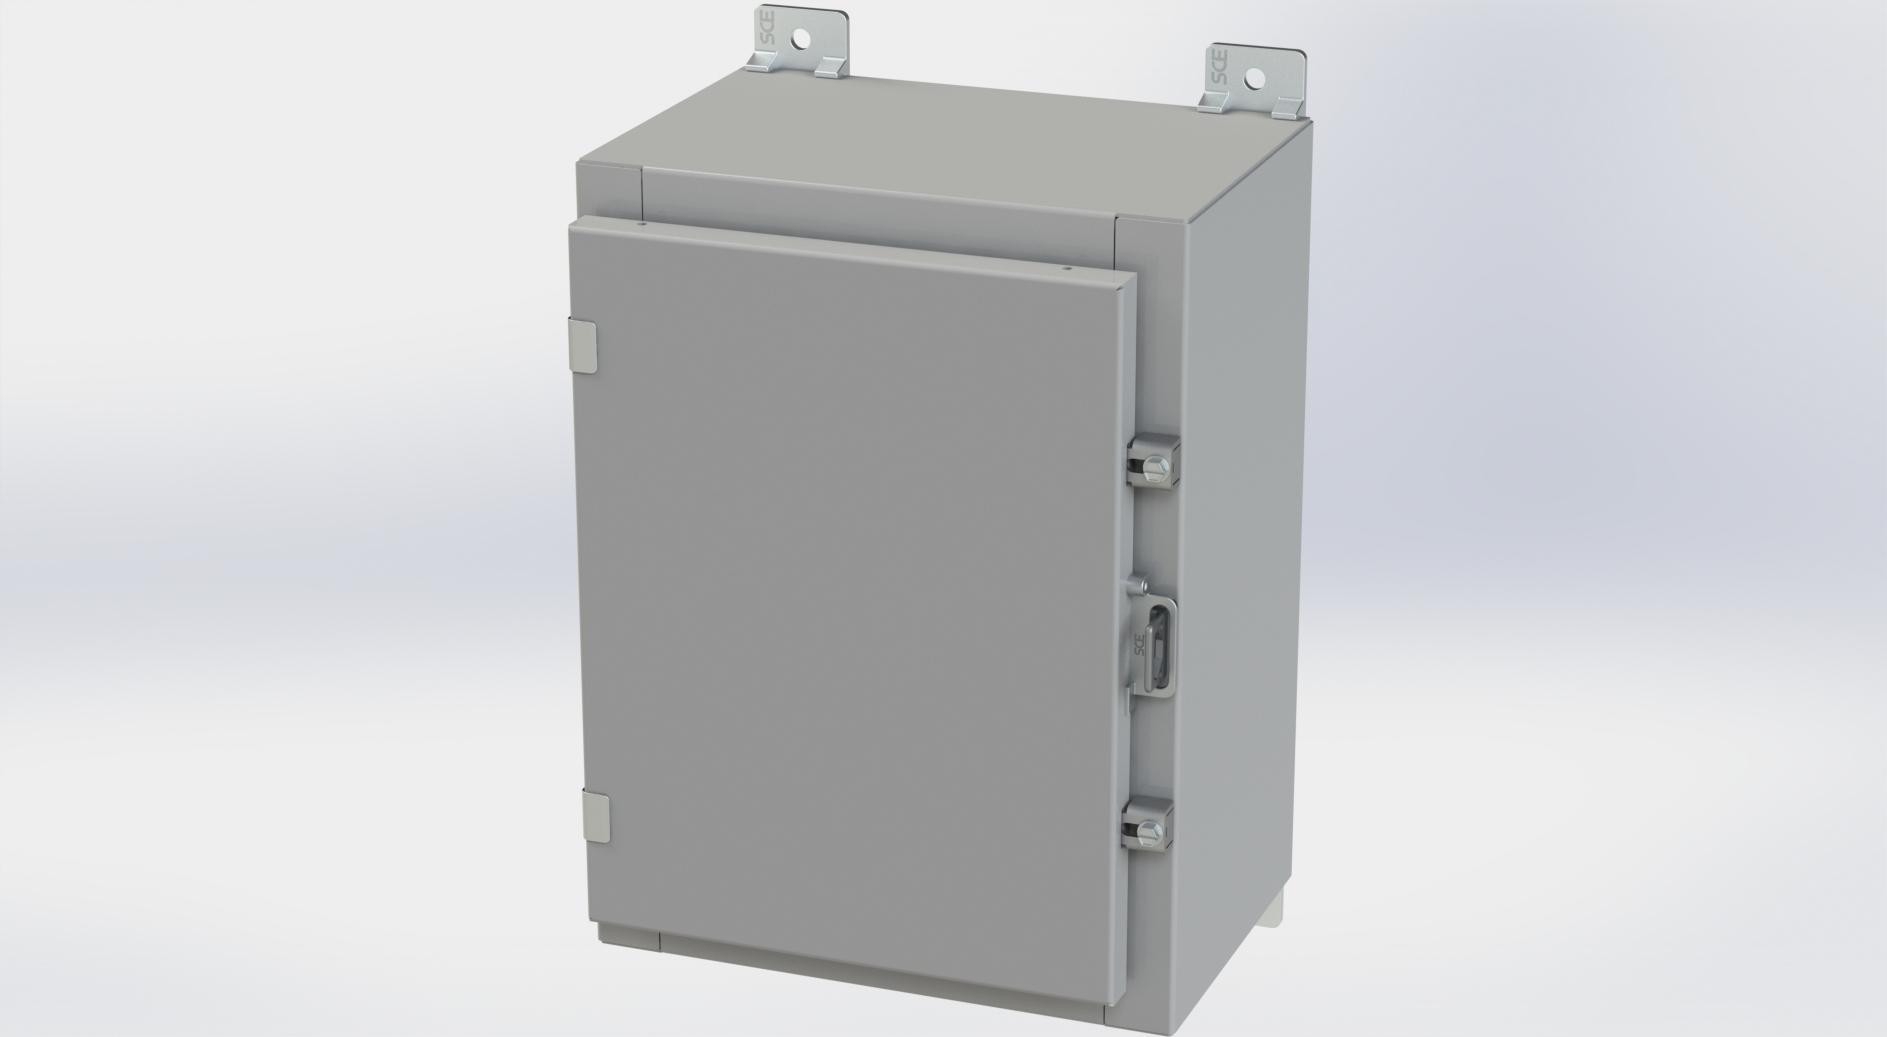 Saginaw Control SCE-16H1208LP Nema 4 LP Enclosure, Height:16.00", Width:12.00", Depth:8.00", ANSI-61 gray powder coating inside and out. Optional panels are powder coated white.